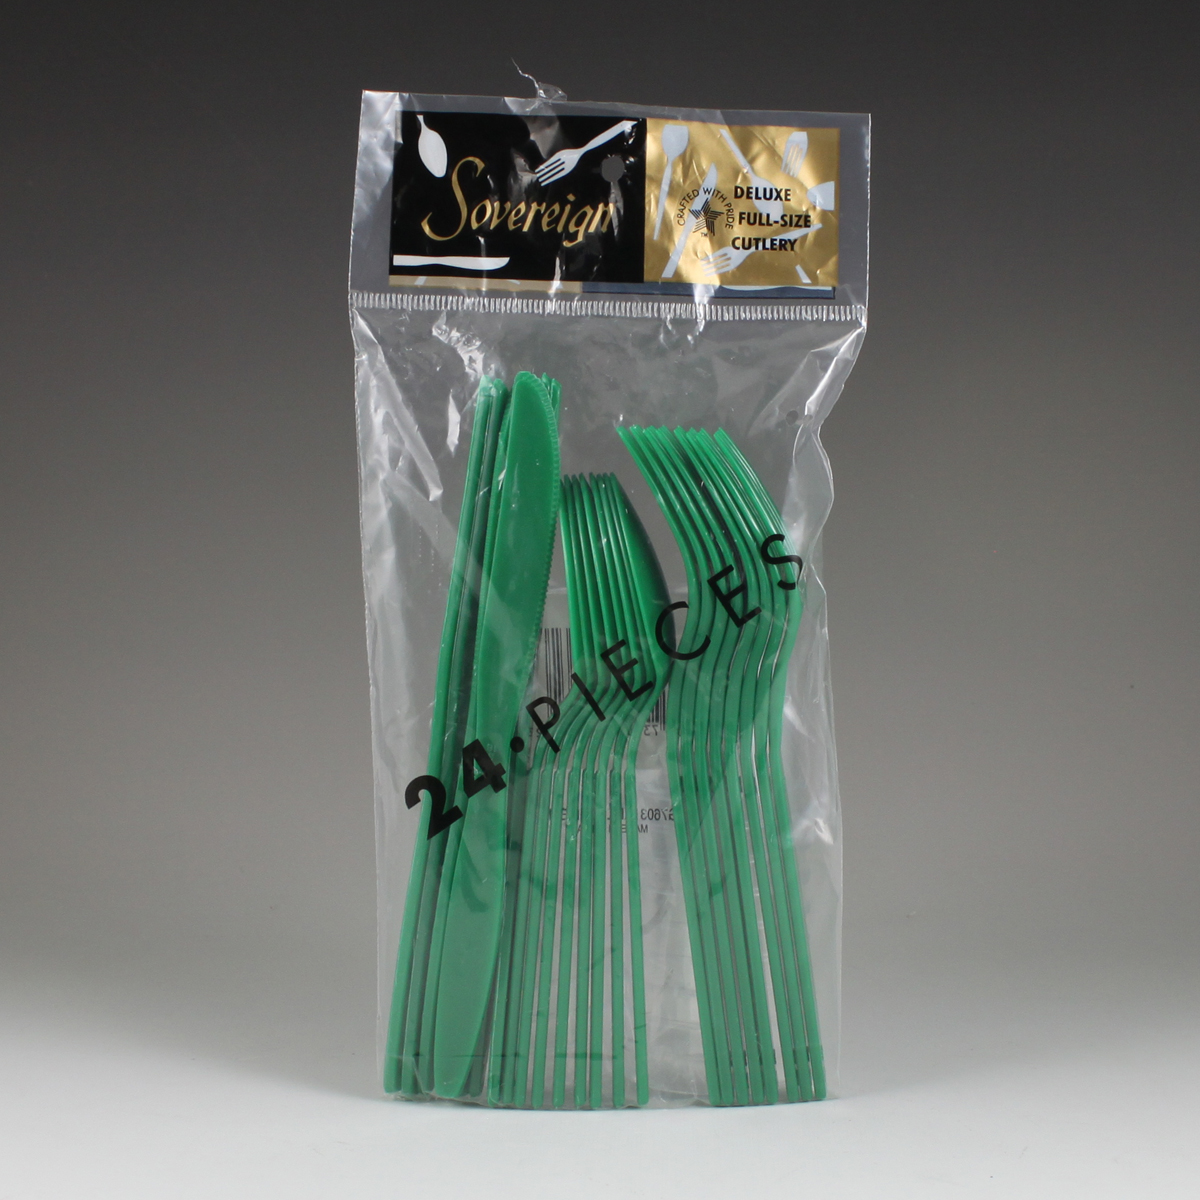 Sovereign Poly Bagged (24 Ct.) - Asst.